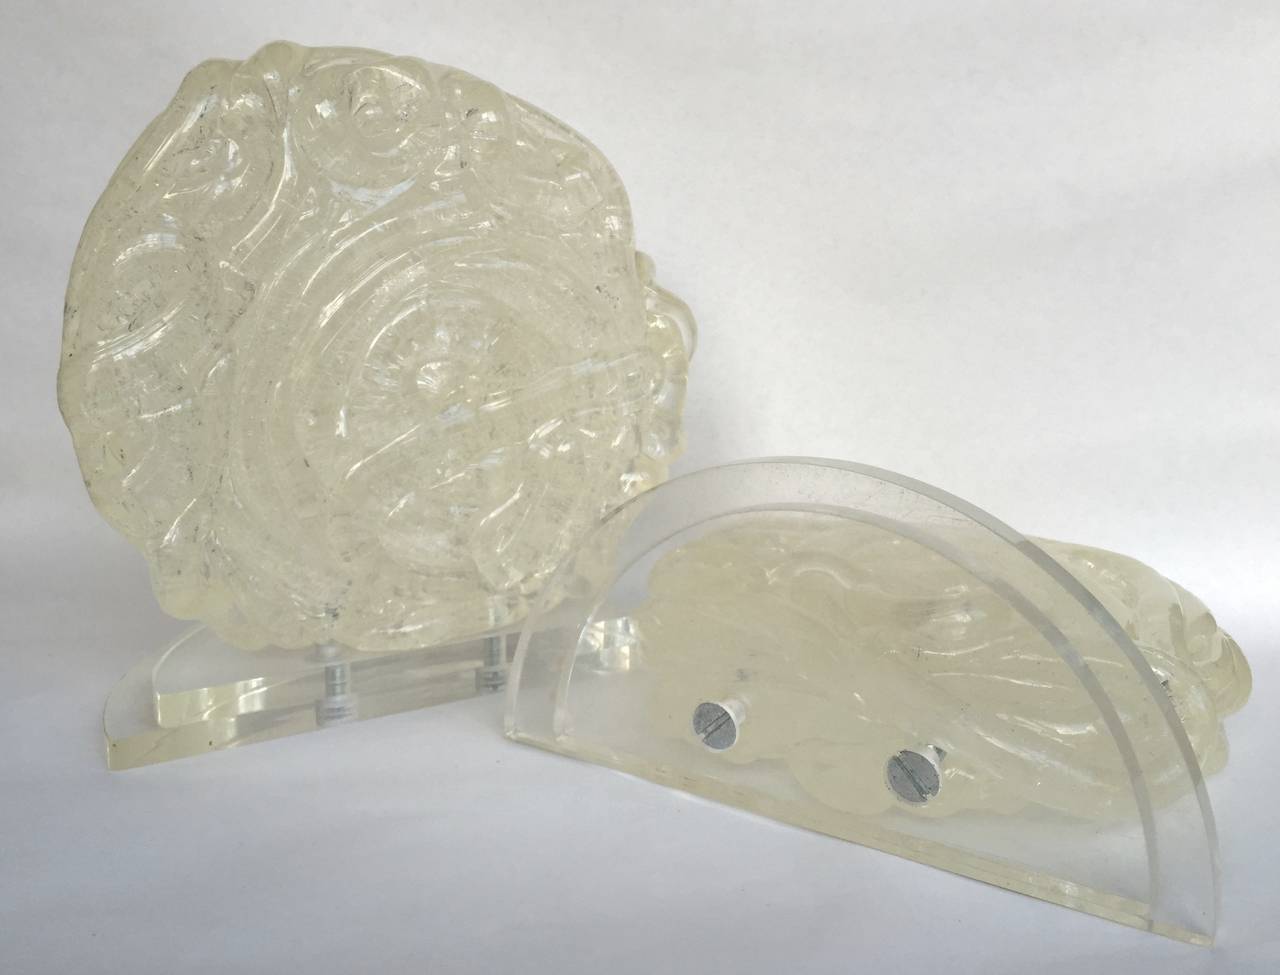 Hand-formed sculptural twists of Lucite rod form a heavy Baroque disk mounted on a stepped clear Lucite base, American, 1950s.